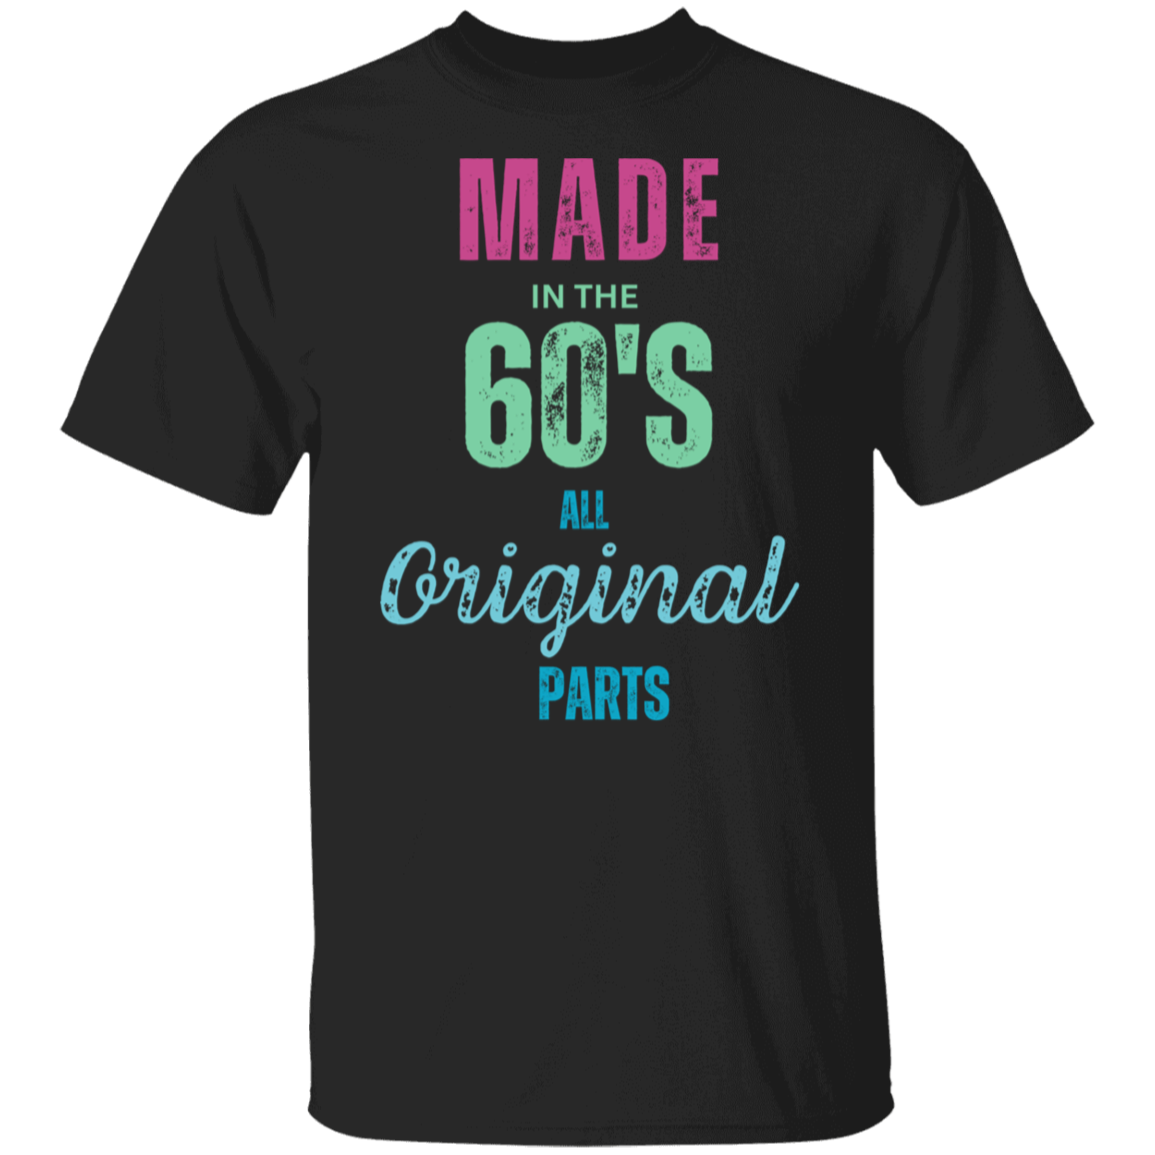 MADE IN THE 60'S   5.3 oz. T-Shirt